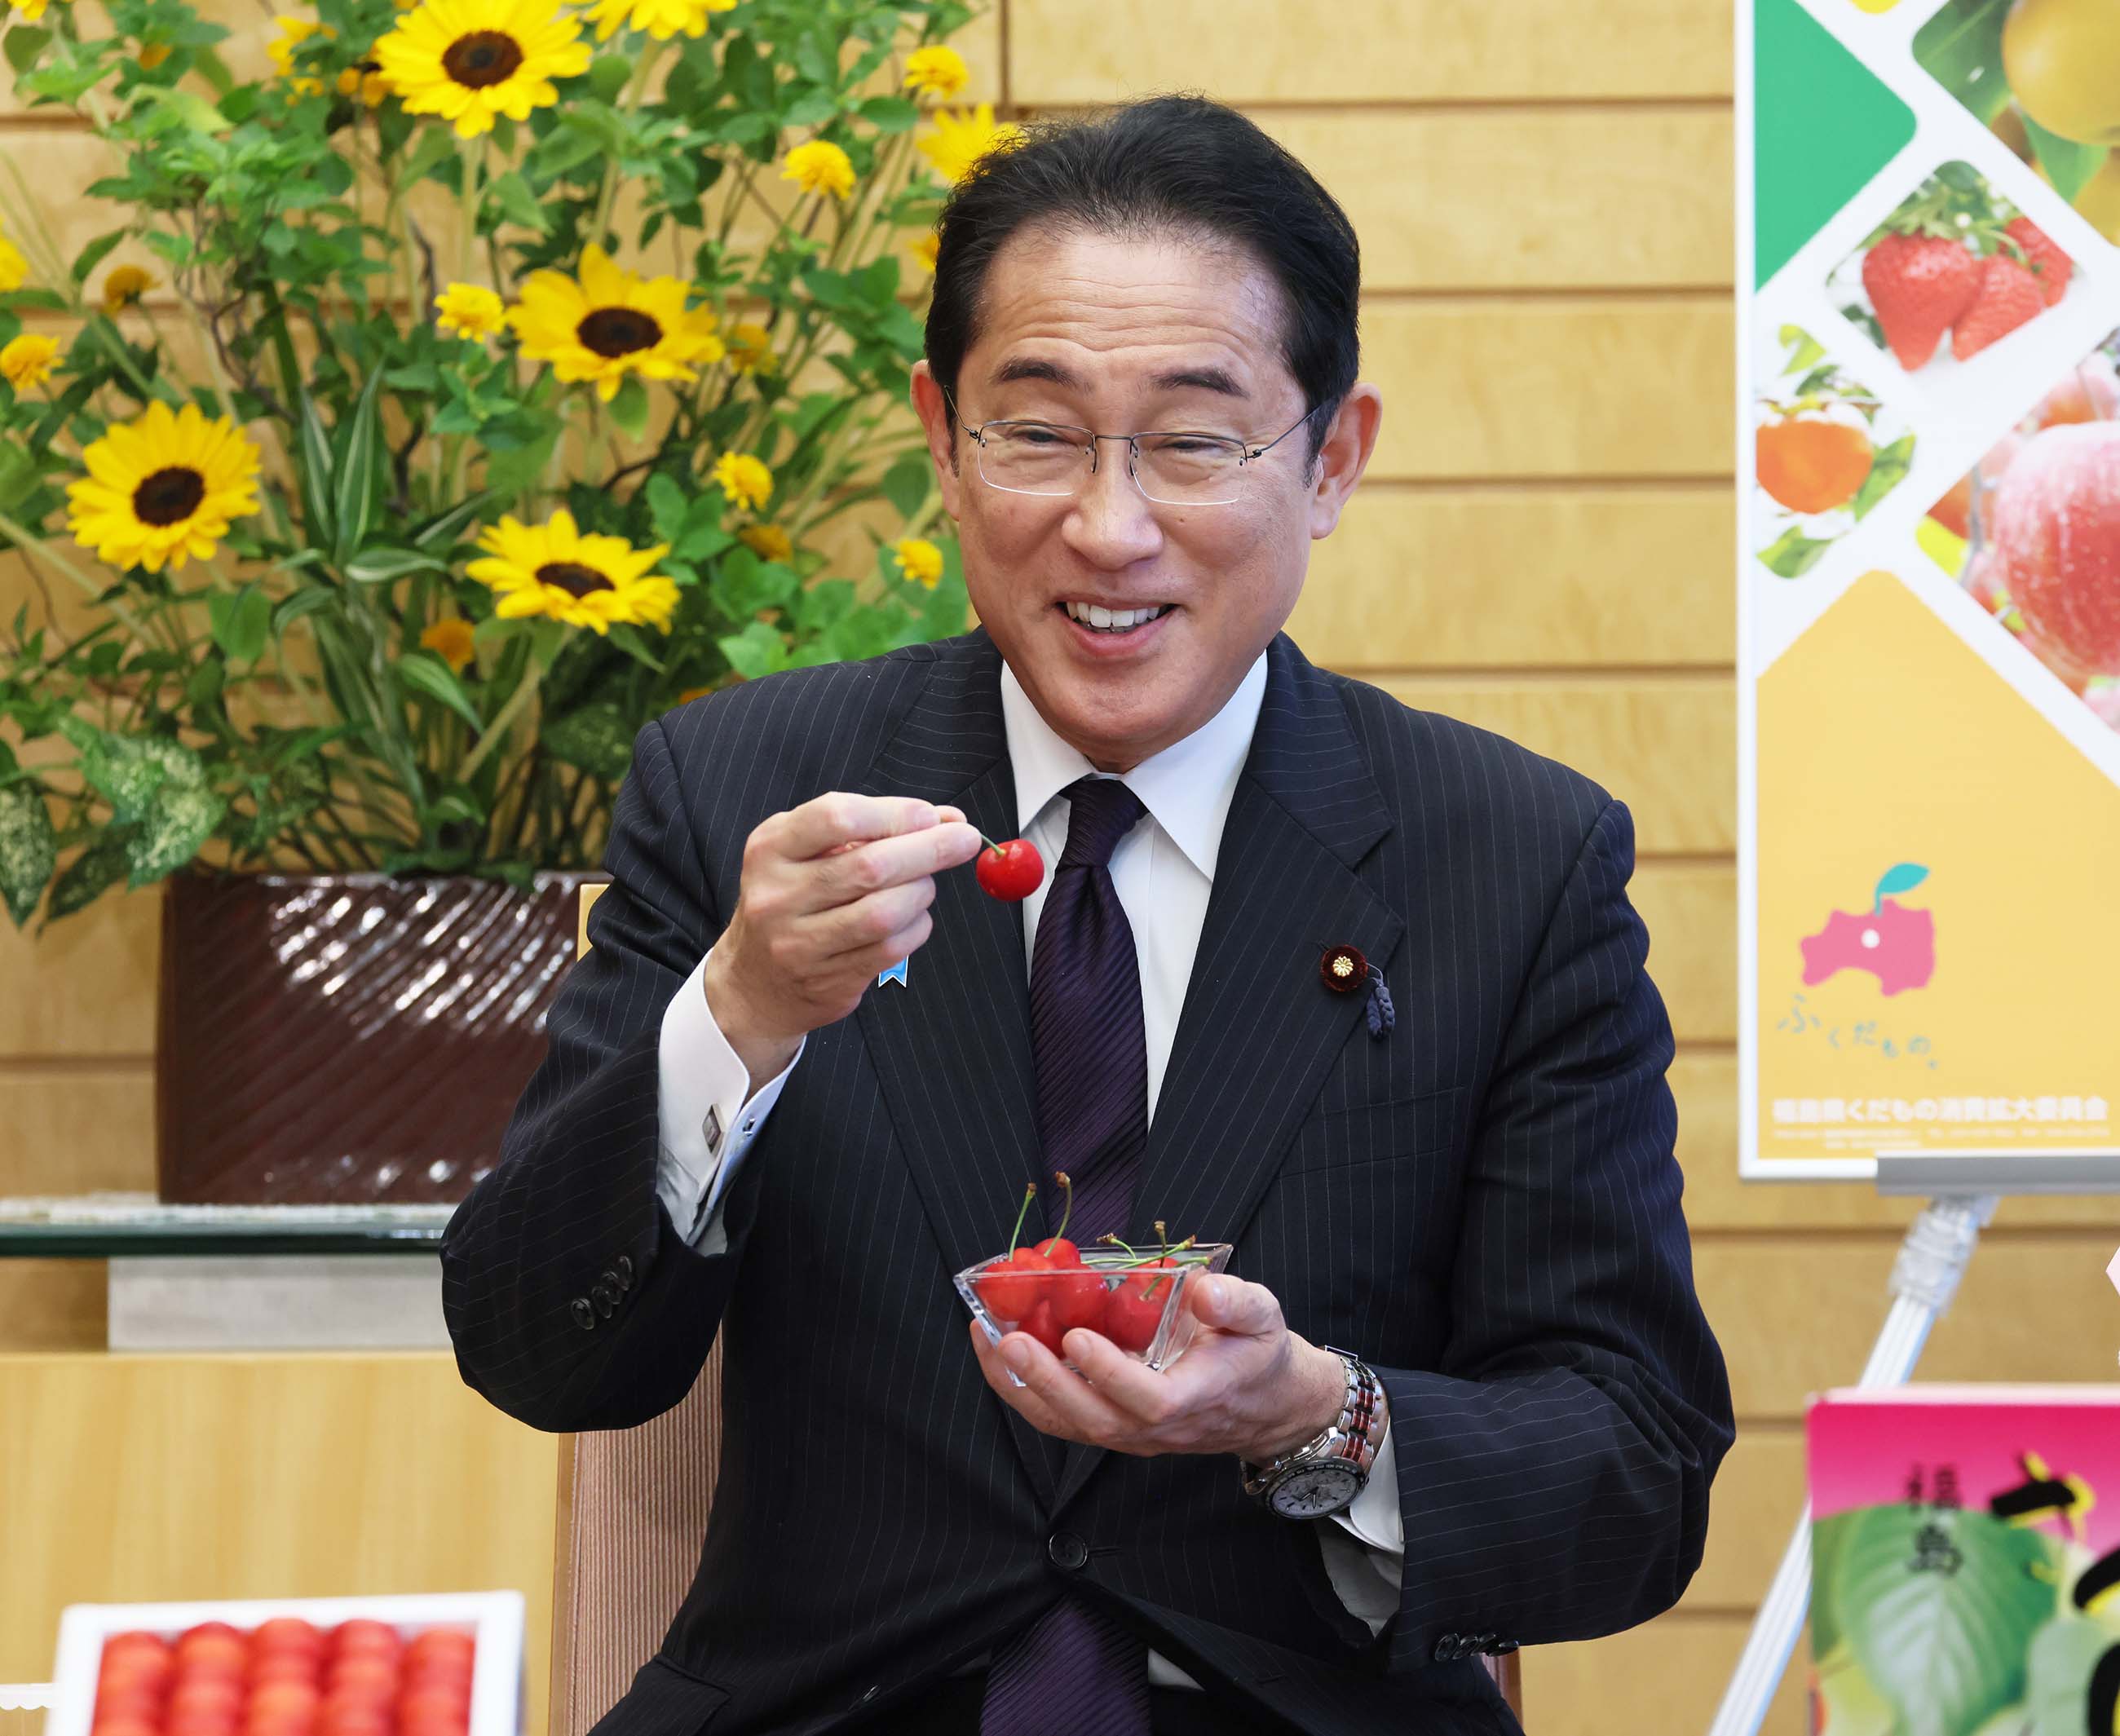 Prime Minister Kishida being presented with cherries (2)